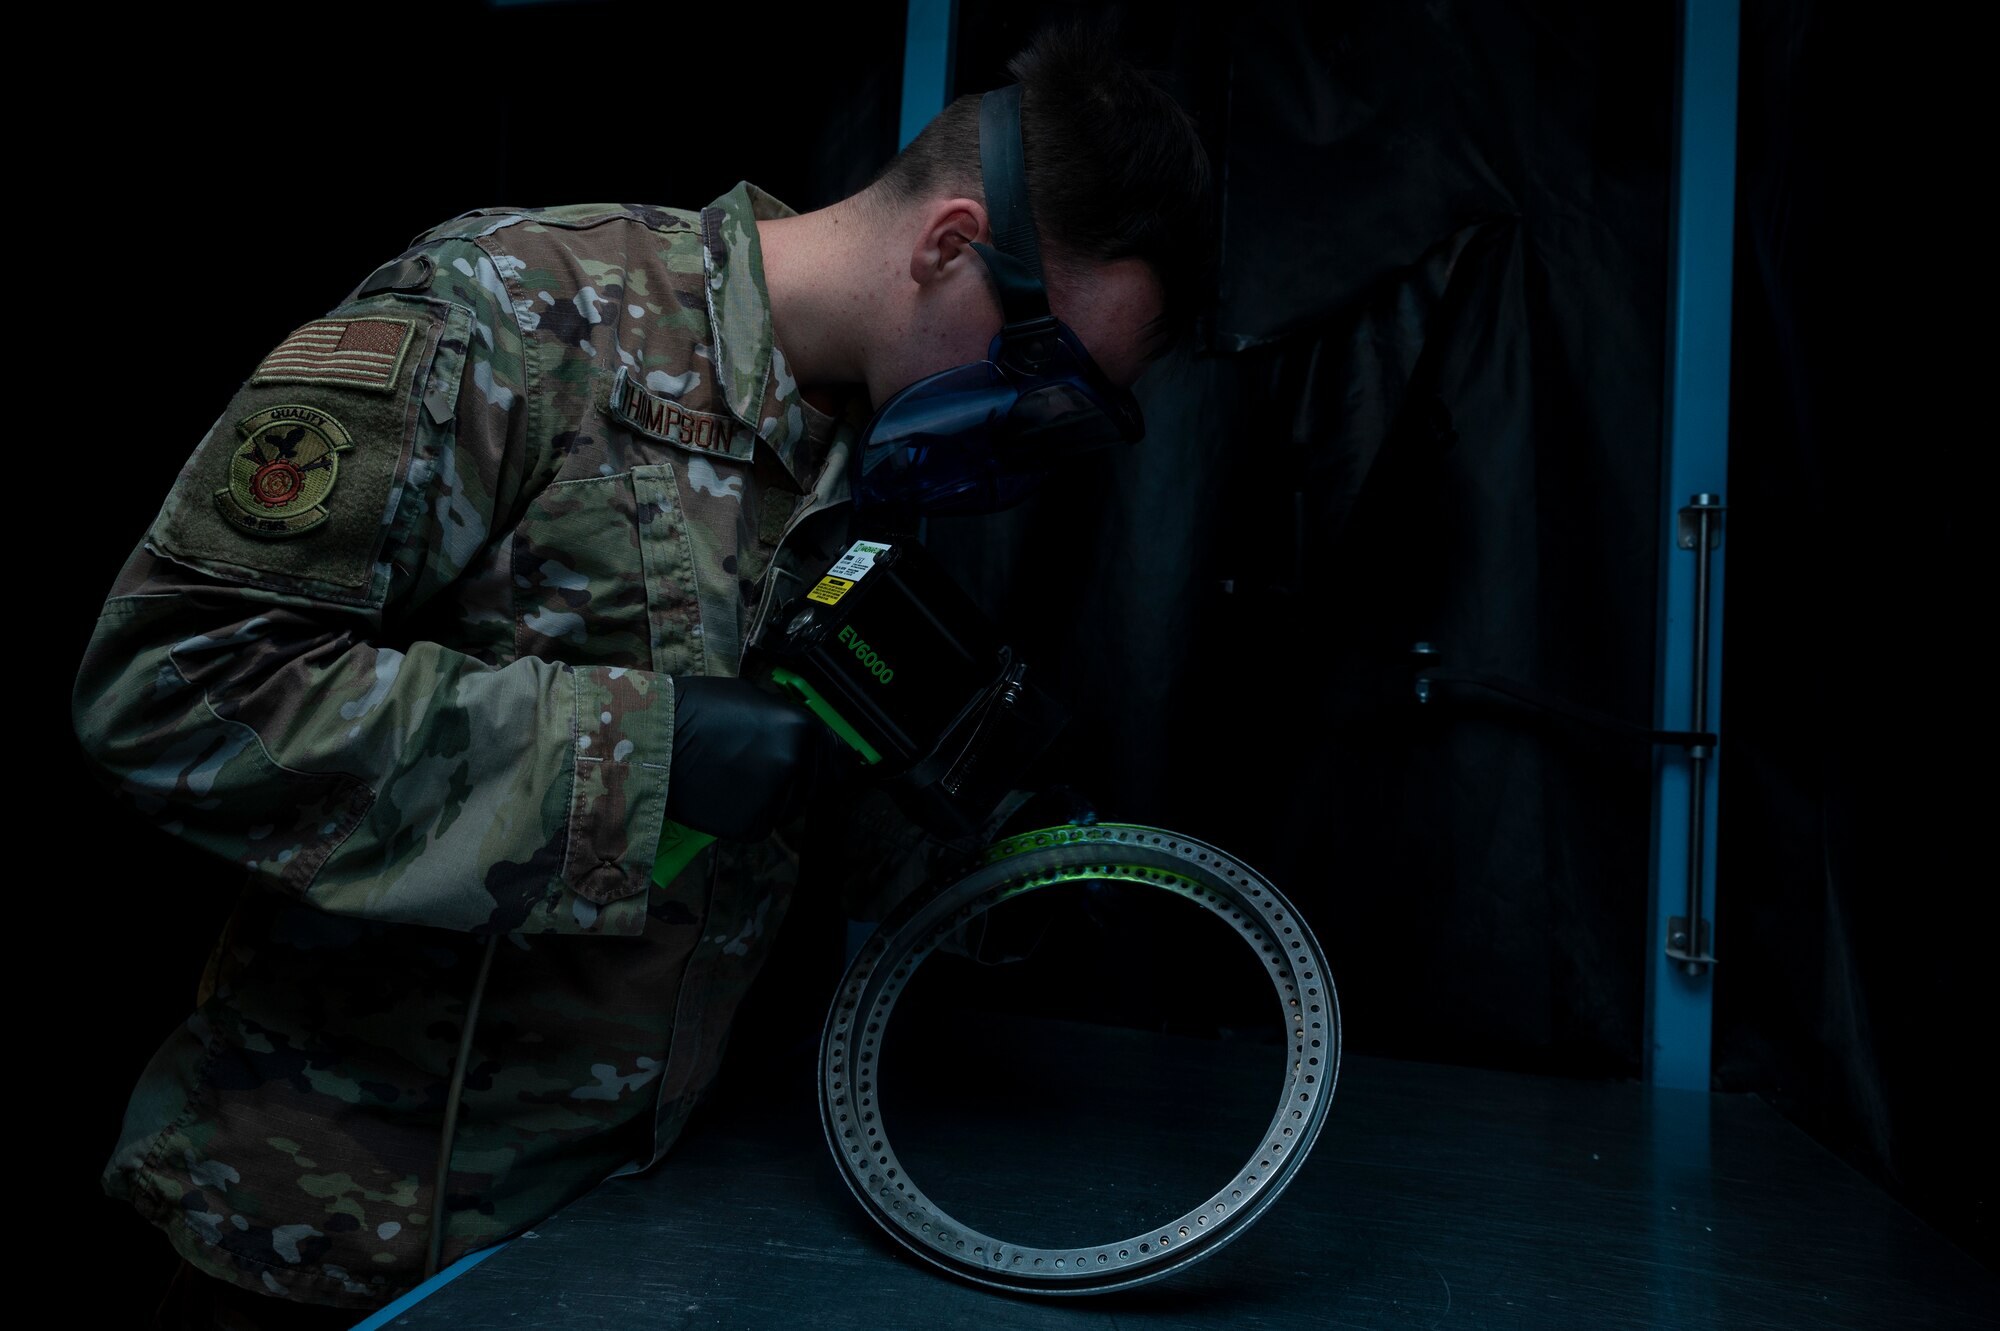 A man in green OCPs uses a black light to look over an aircraft part.